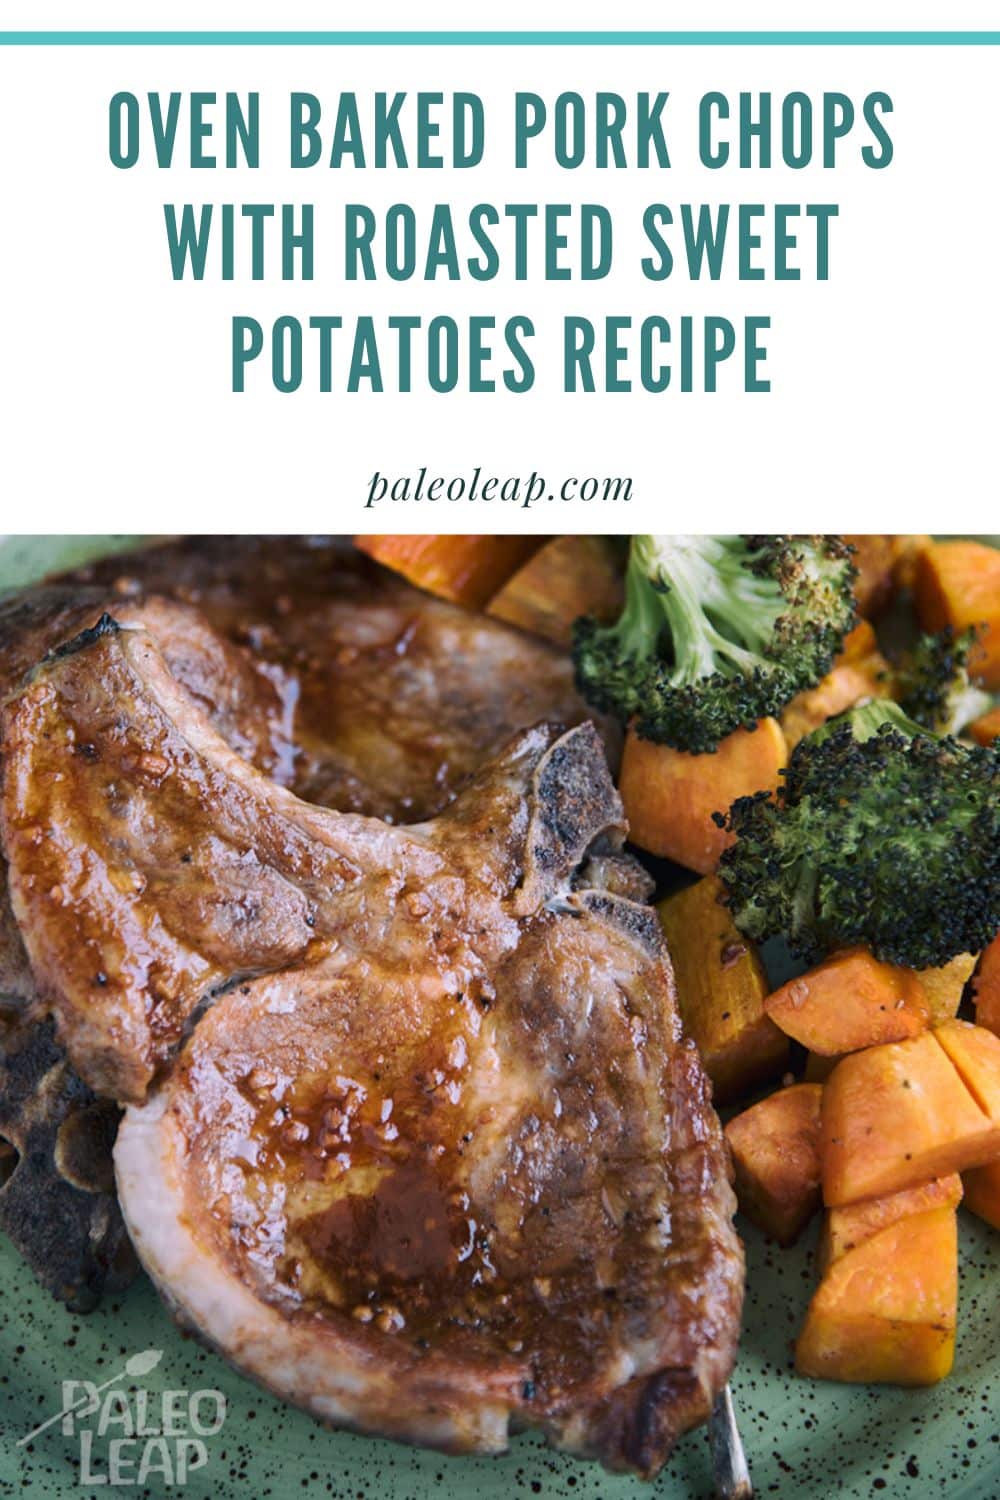 Oven Baked Pork Chops with Roasted Sweet Potatoes Recipe | Paleo Leap